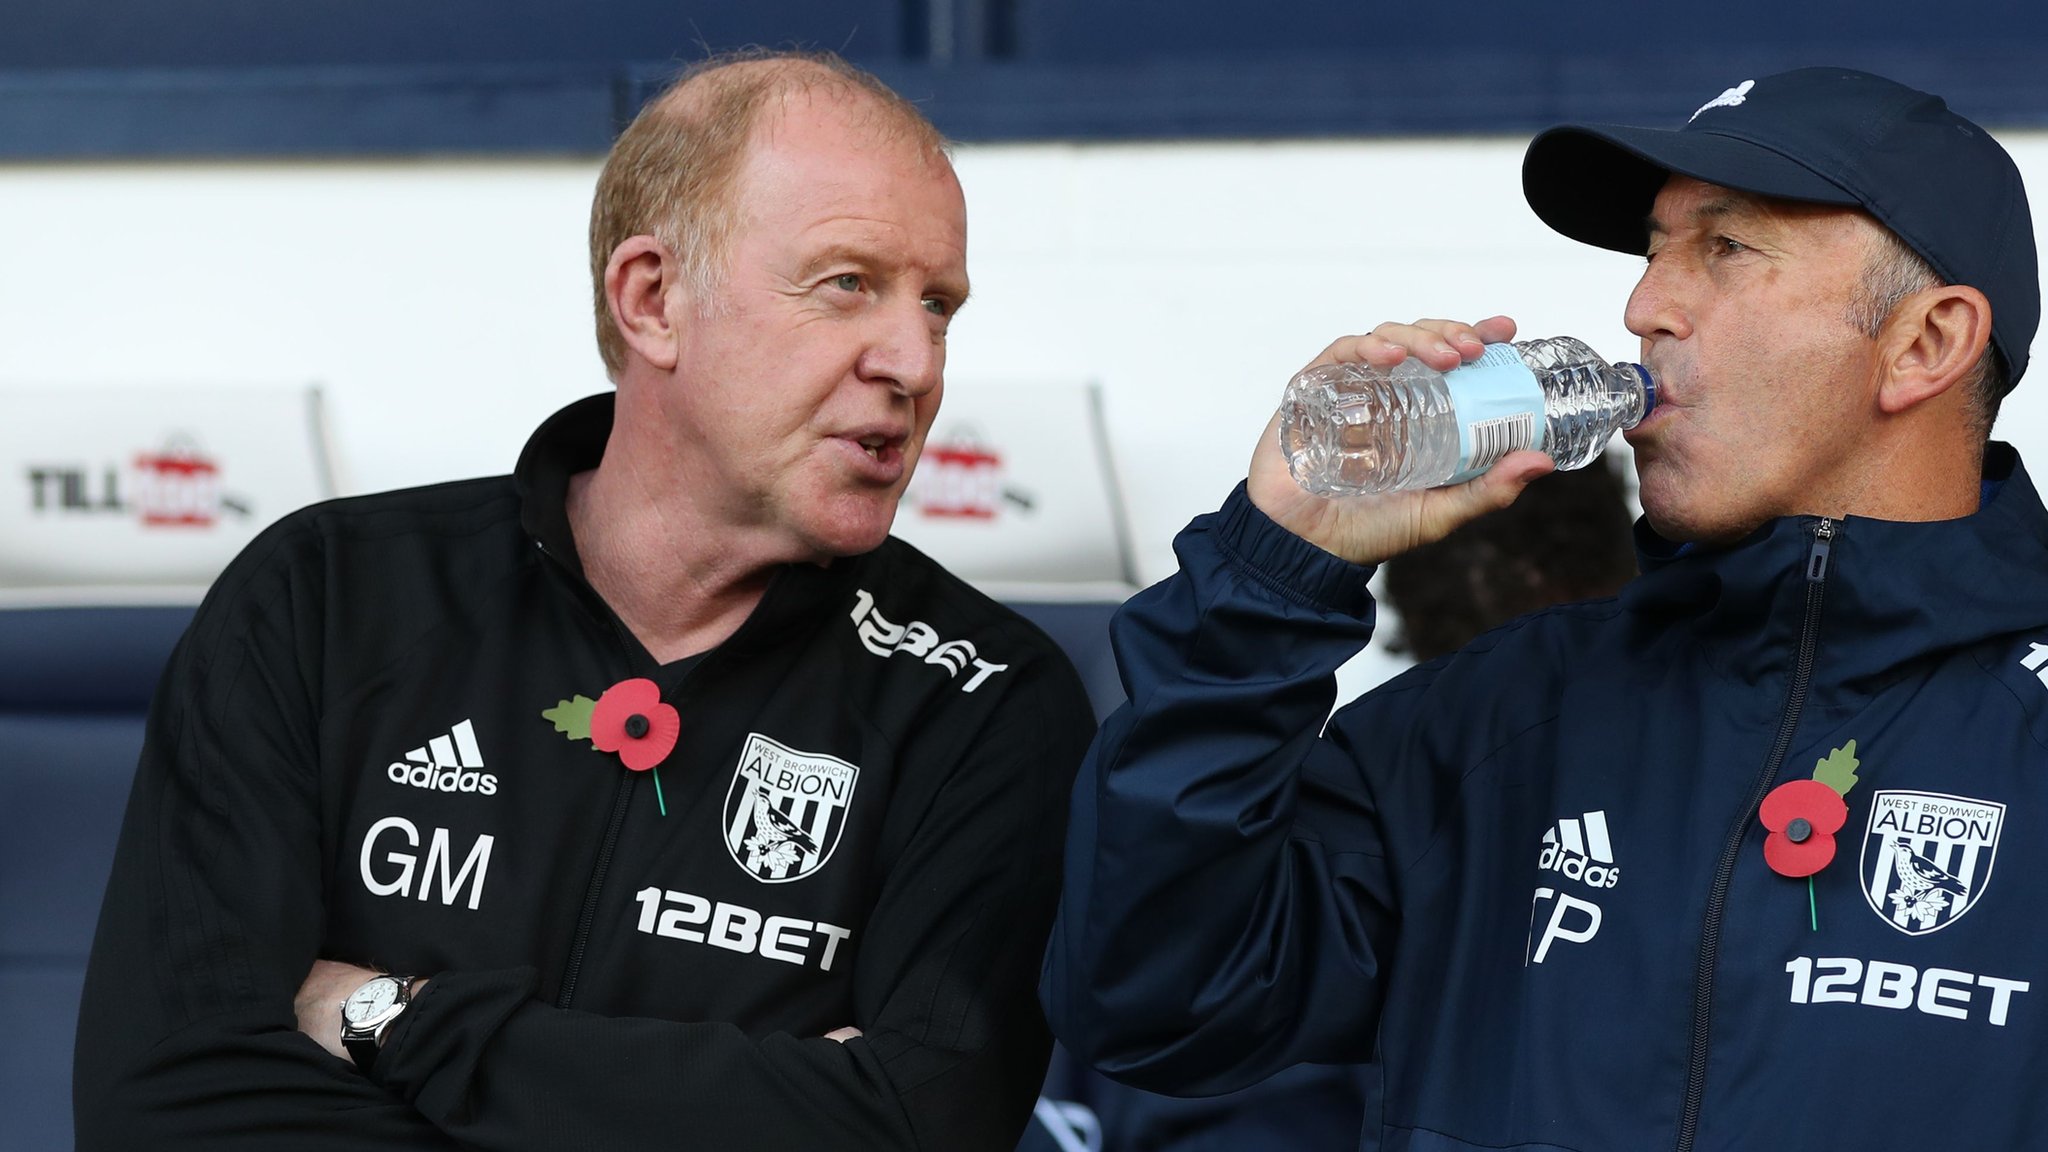 Gary Megson: West Bromwich Albion players can do better, says interim boss